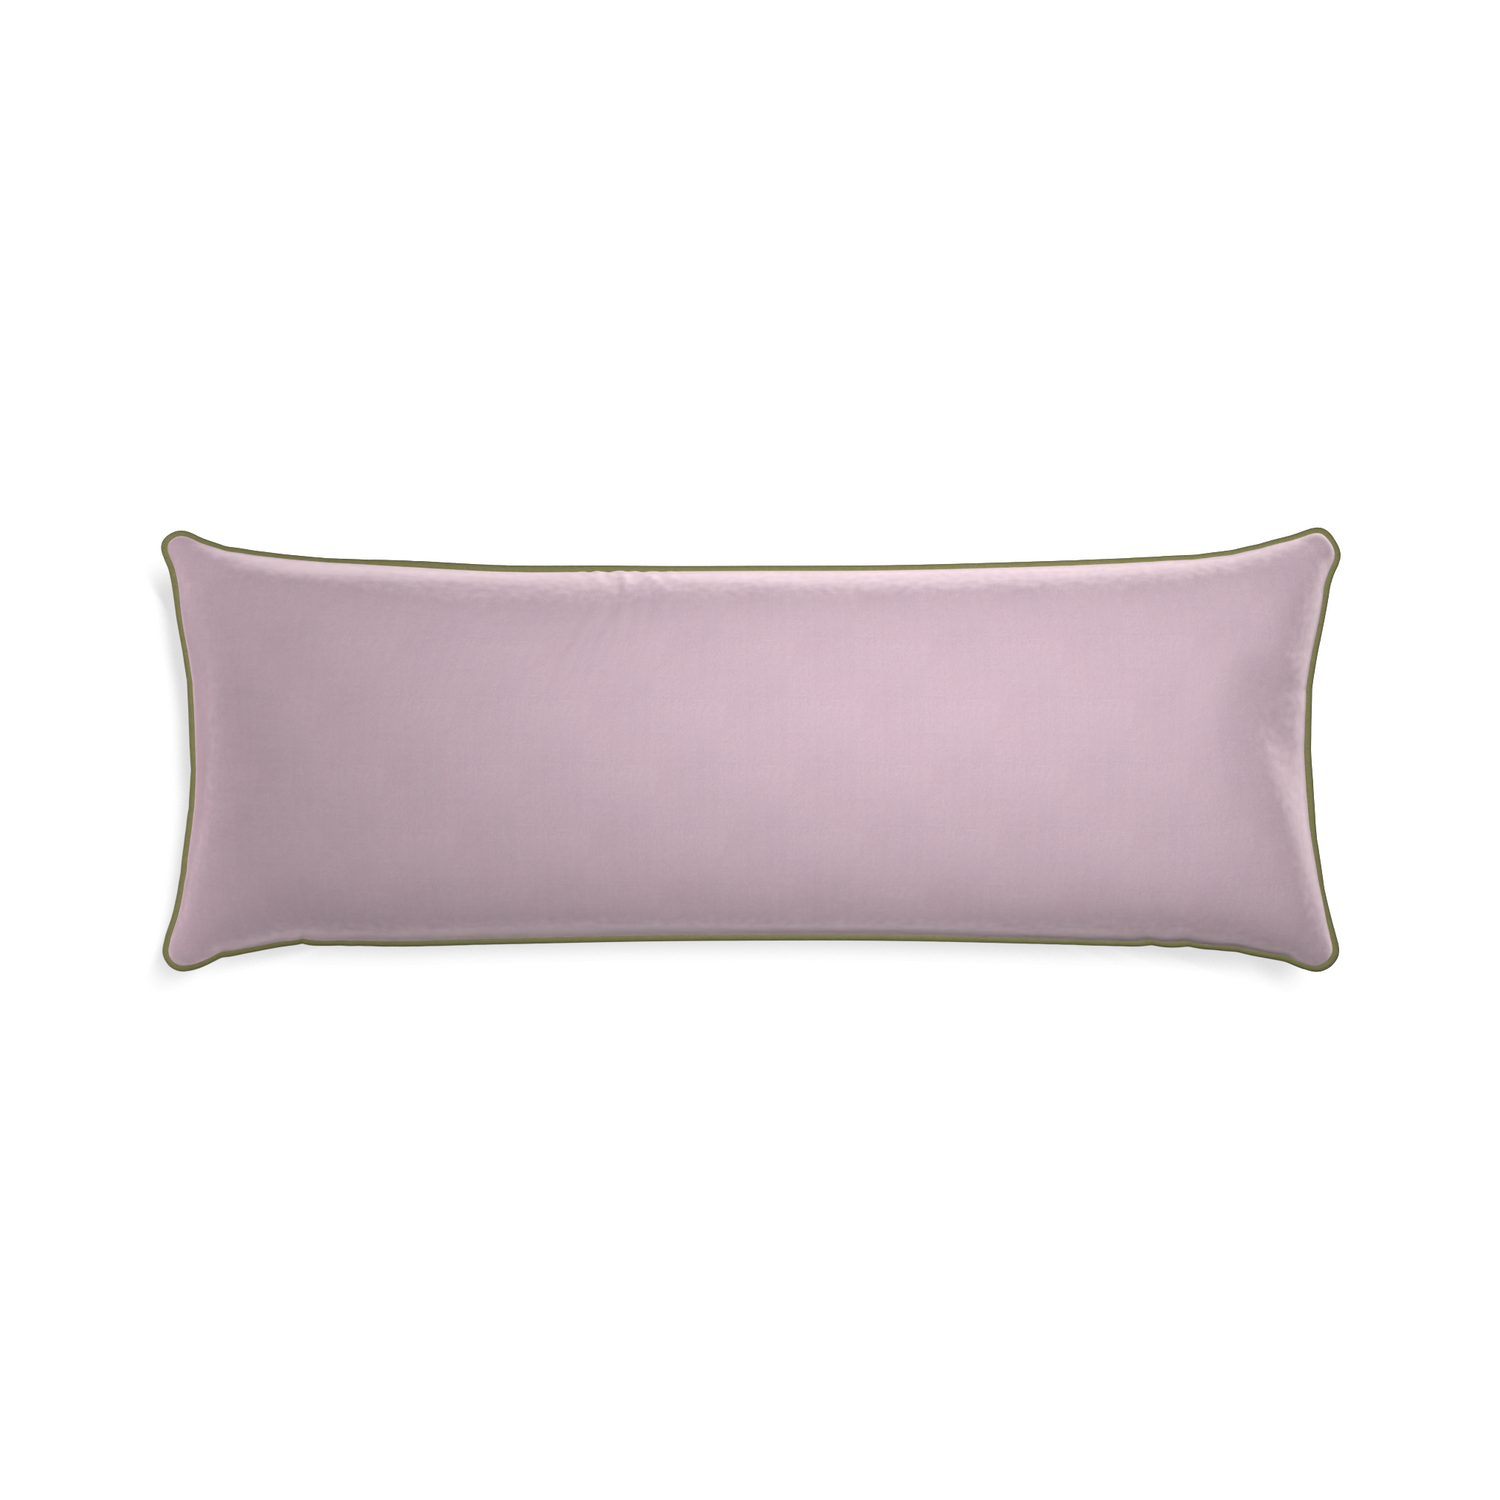 Xl-lumbar lilac velvet custom pillow with moss piping on white background